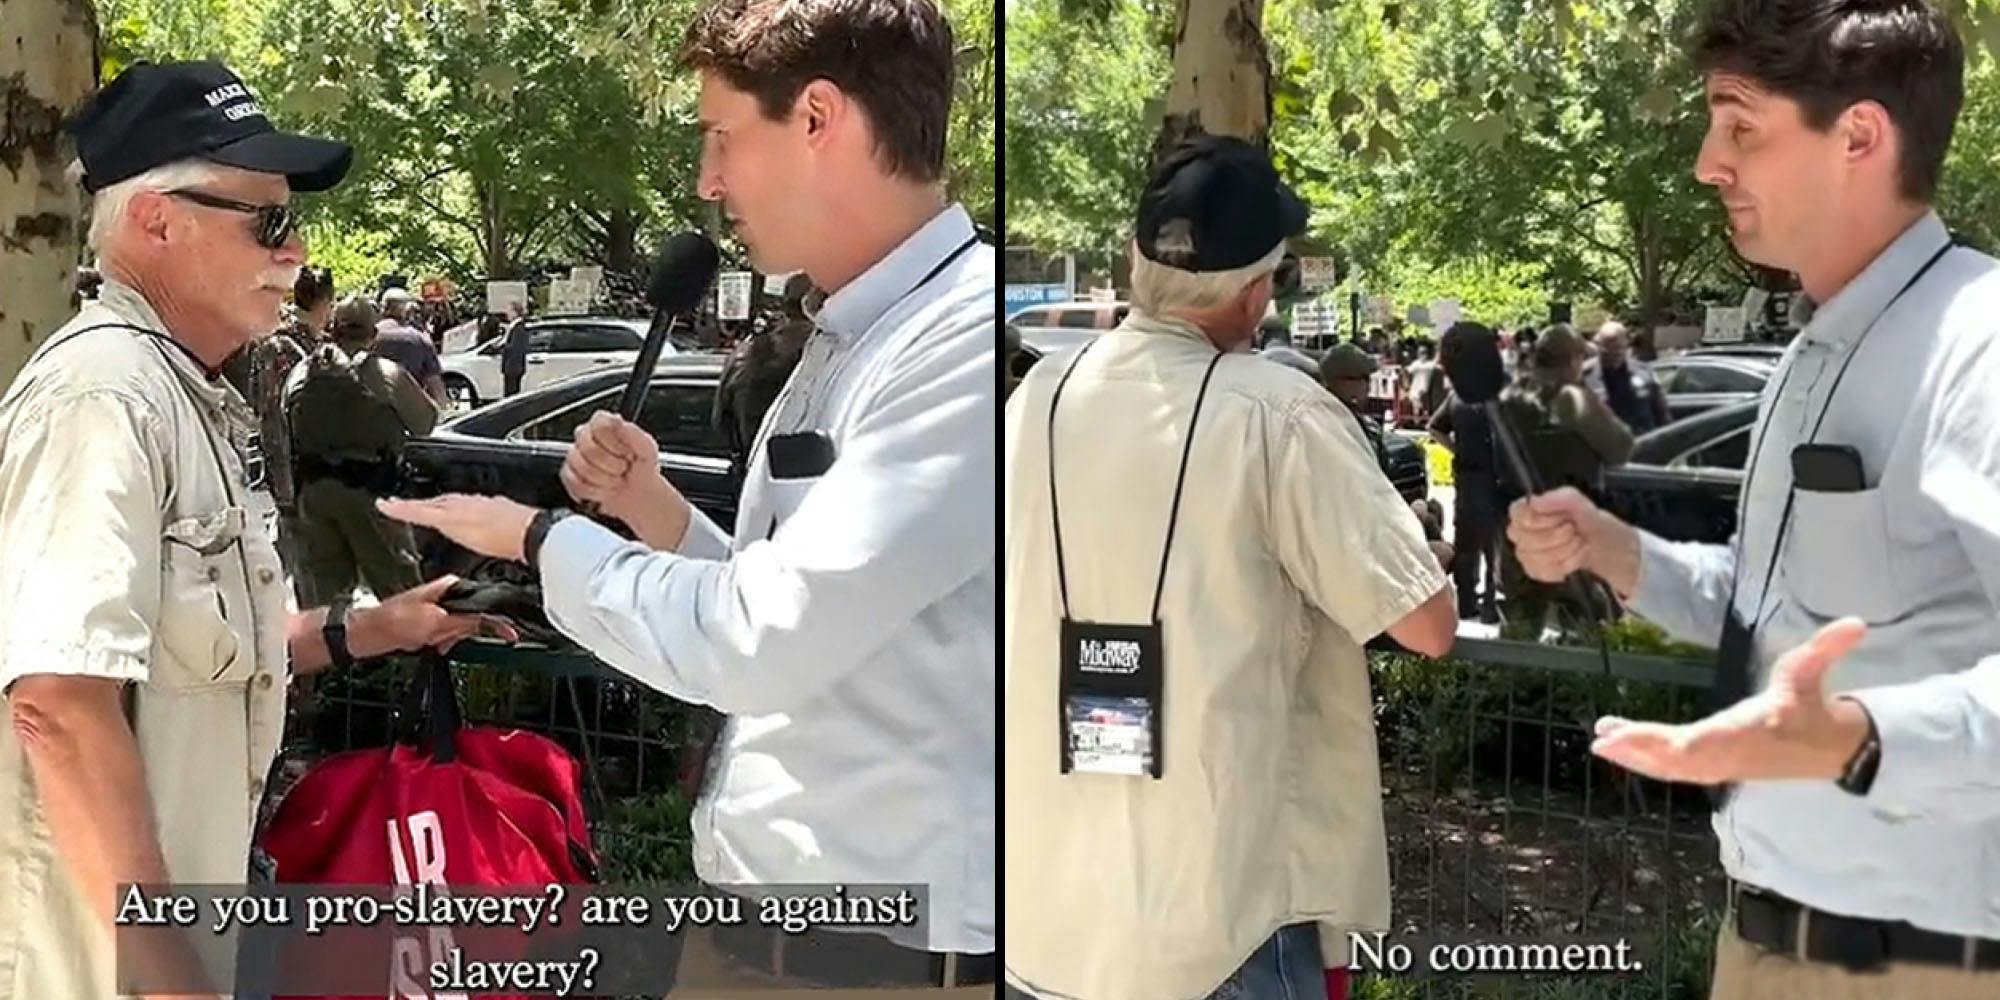 Man holding microphone to man with confederate flag shirt caption "Are you pro-slavery? Are you against slavery?" (l) Man holding microphone to man with confederate flag shirt with back turned caption "No comment."